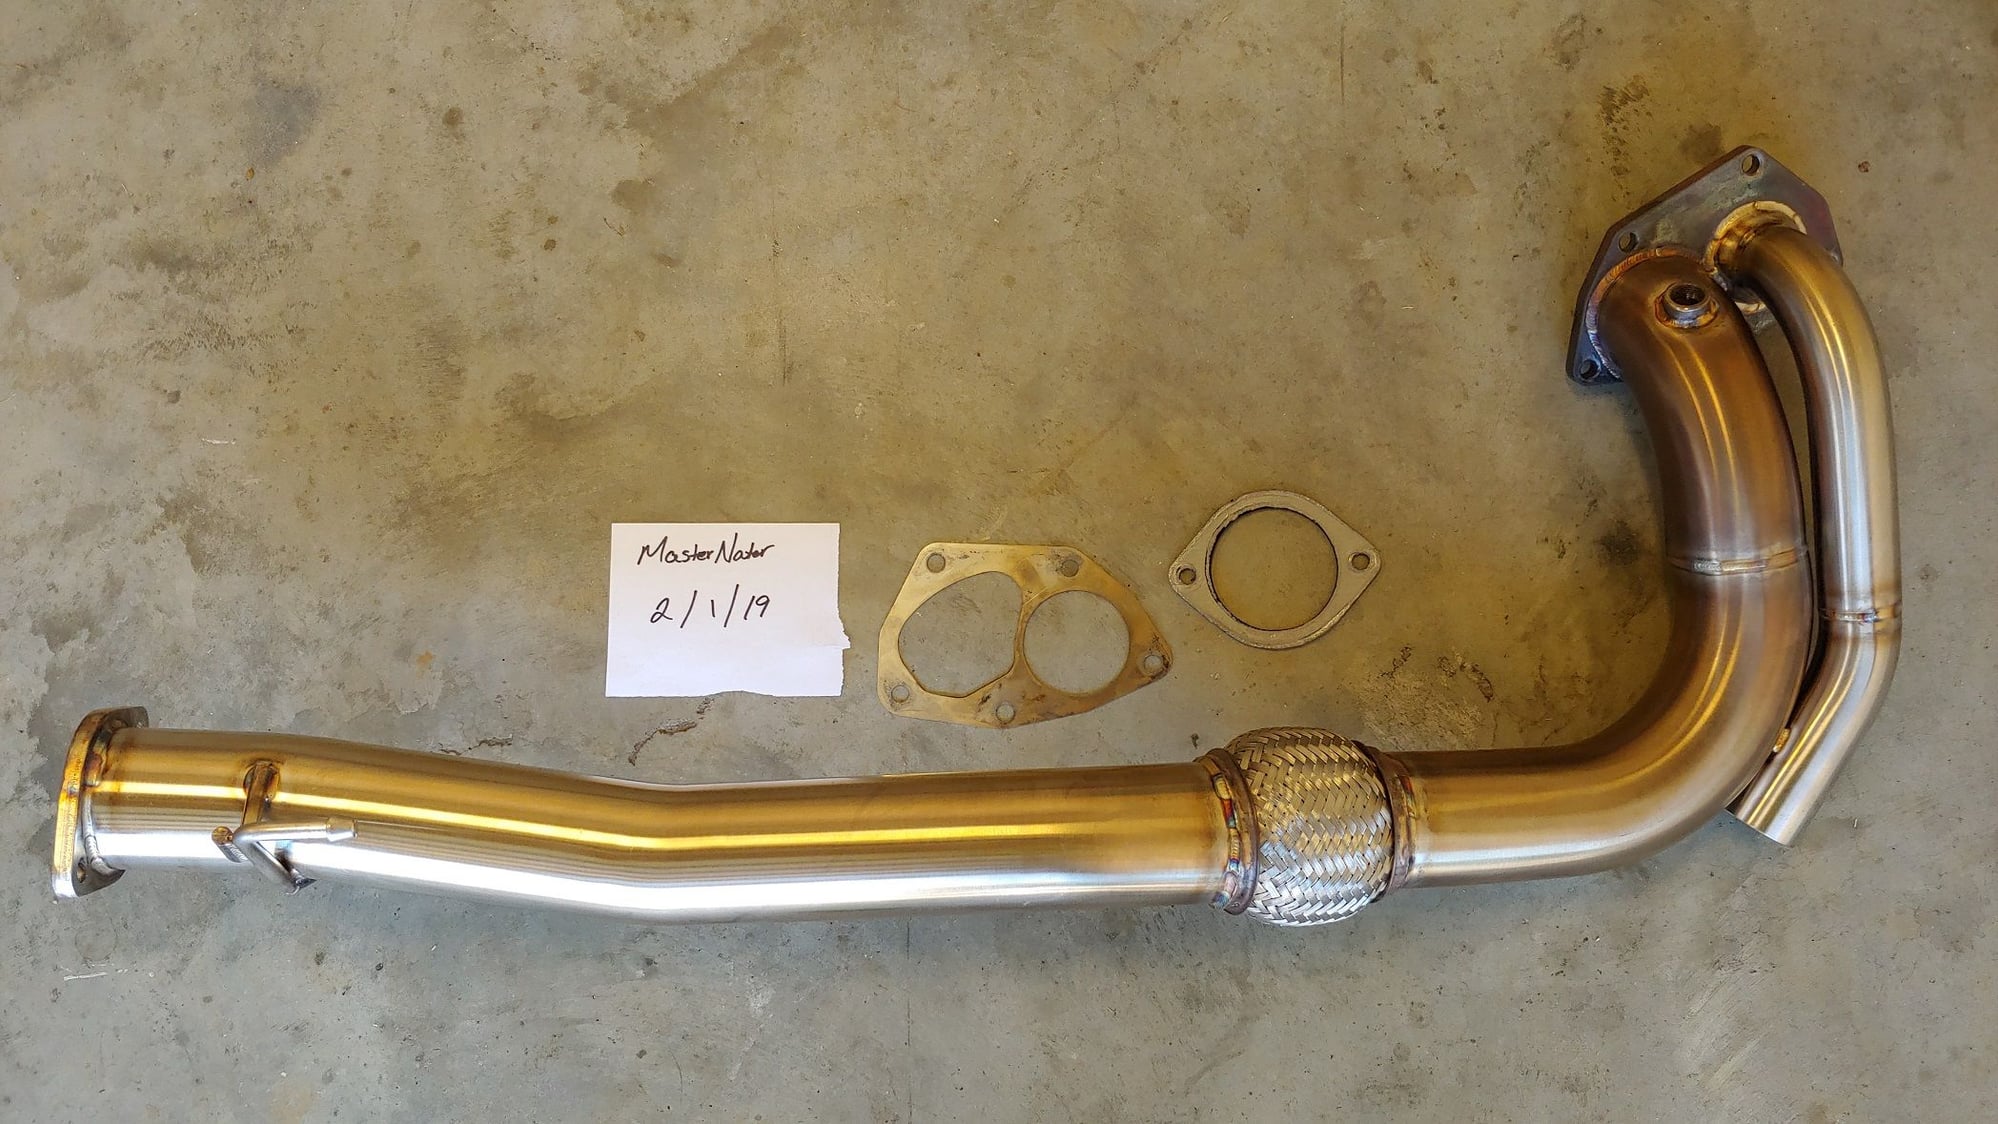 Engine - Exhaust - FS: STM O2/Downpipe Combo for Evo 8/9 - Used - 2003 to 2006 Mitsubishi Lancer Evolution - Tupelo, MS 38801, United States